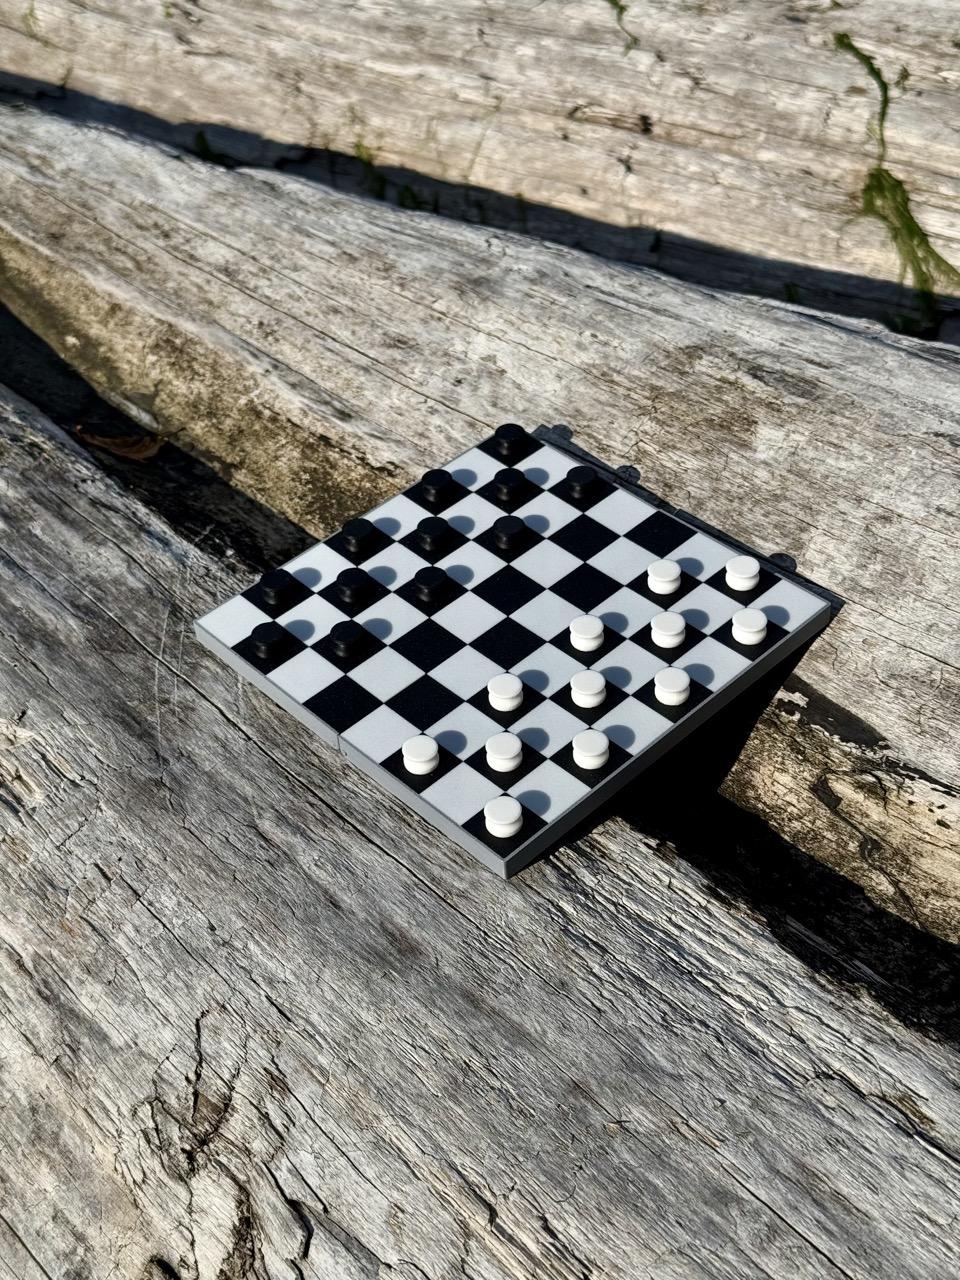 Magnetic Checkers by TeeTi3D (free version) 3d model